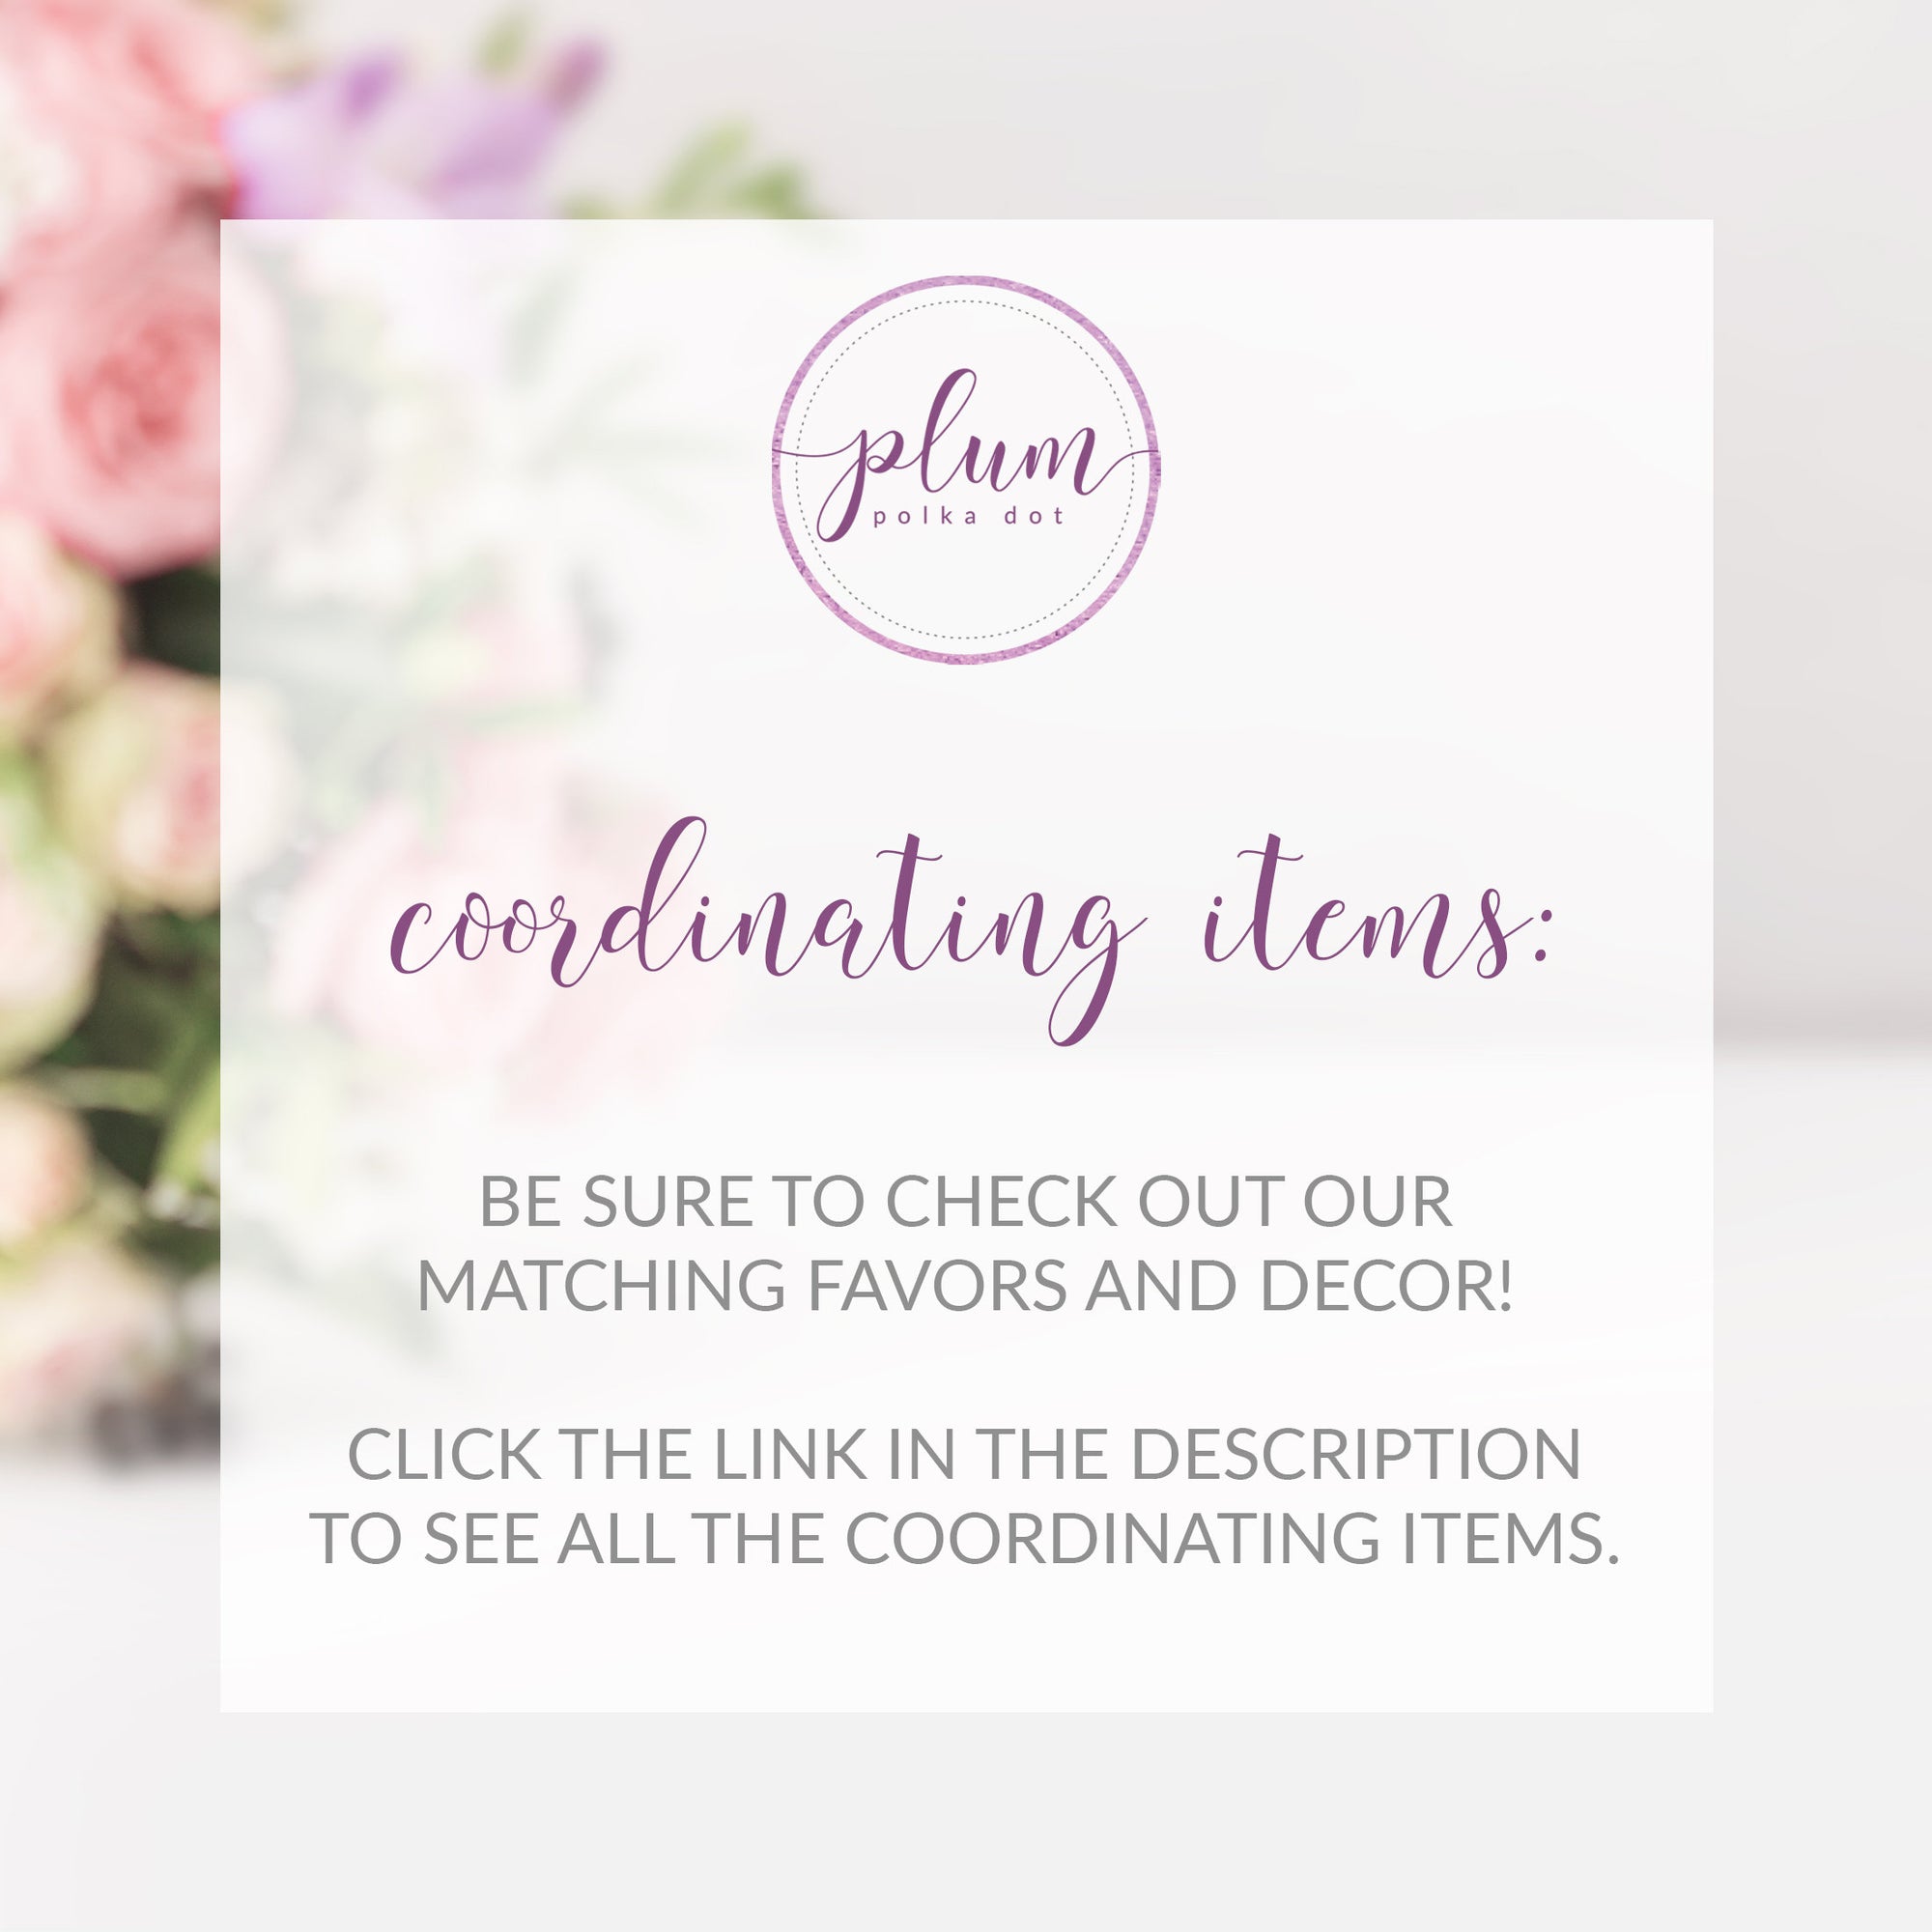 Geometric Rose Gold Greenery Printable Welcome Sign INSTANT DOWNLOAD, Bridal Shower, Baby Shower, Wedding Decorations and Supplies - GFRG100 - @PlumPolkaDot 